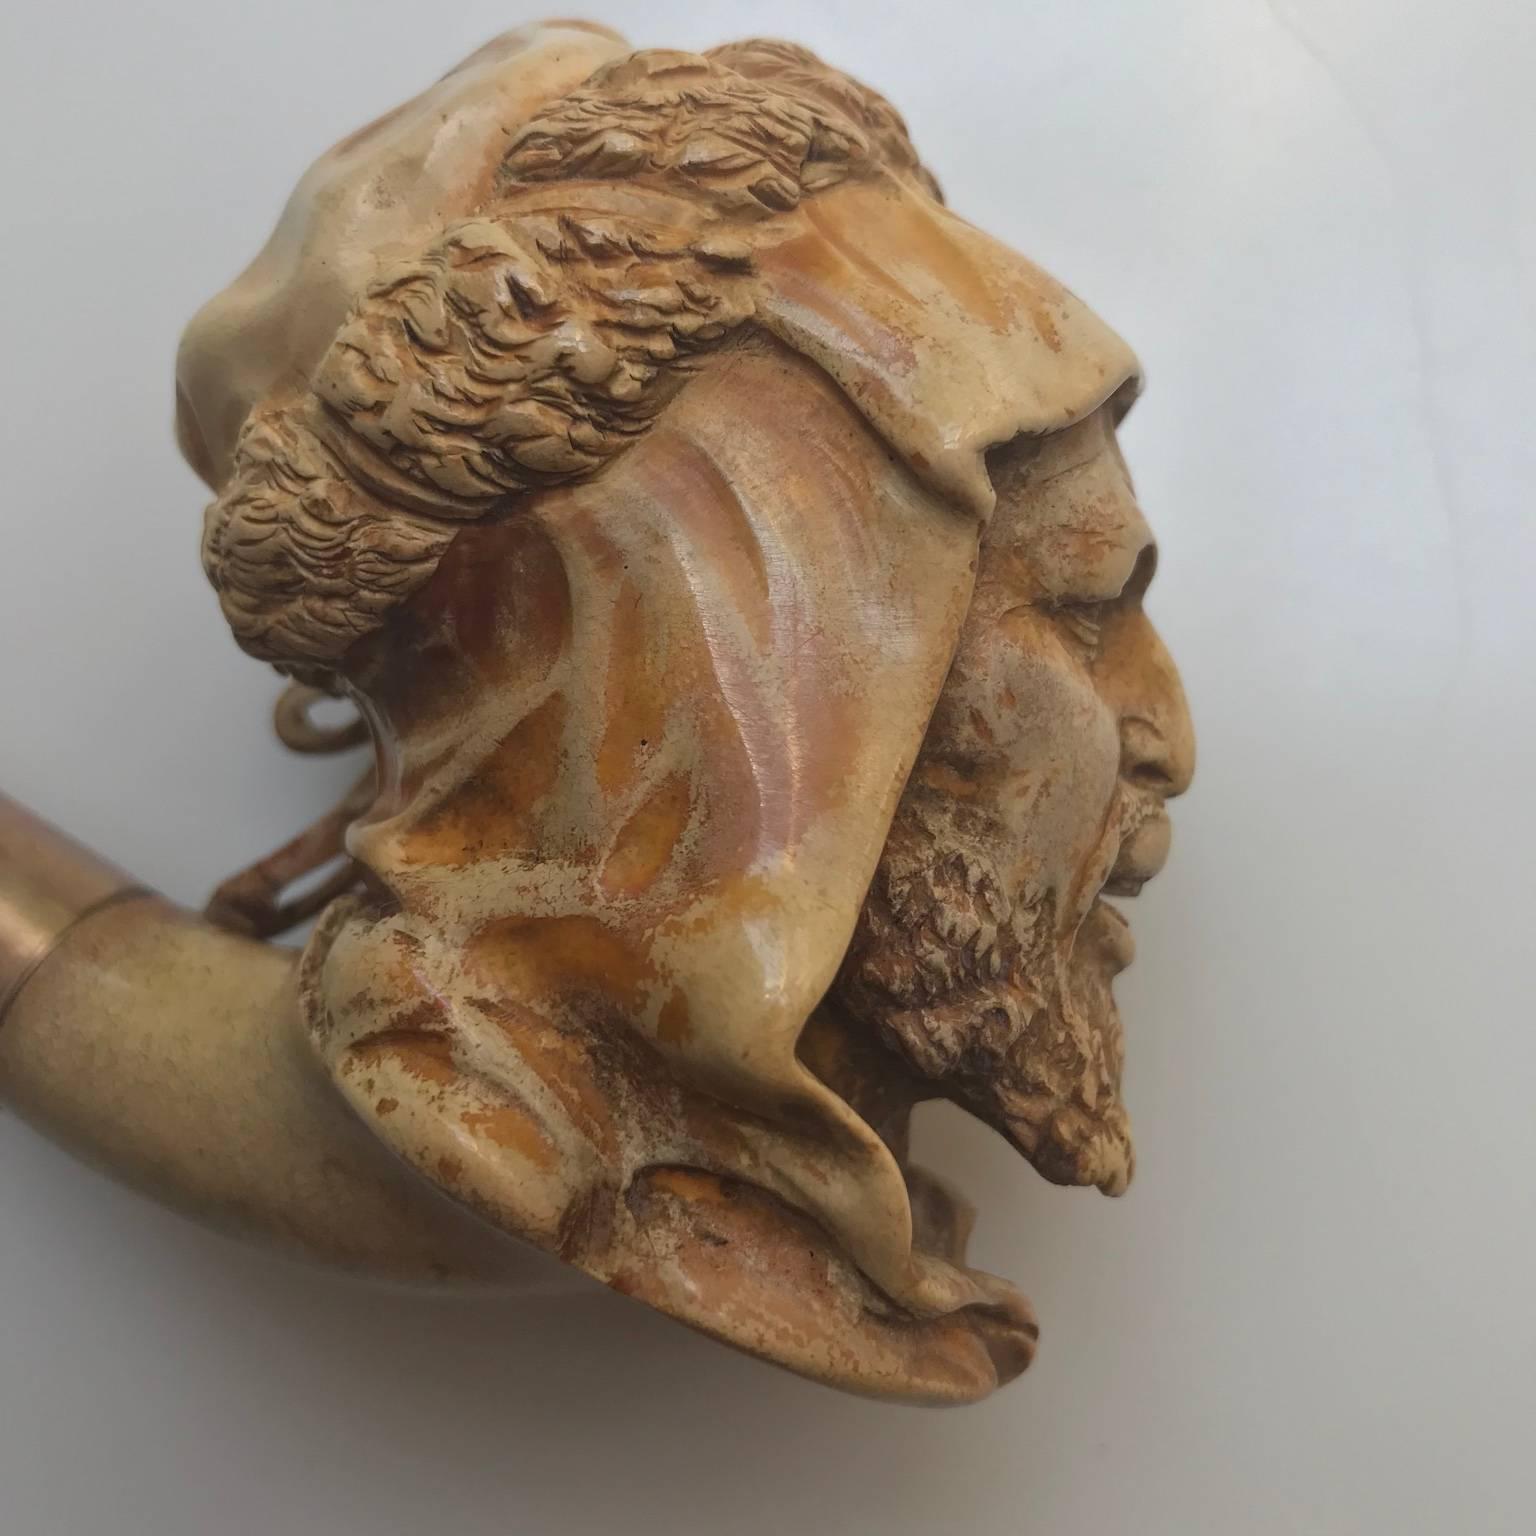 20th Century Two Meerschaum Pipes, Arab Man and Man with Turban